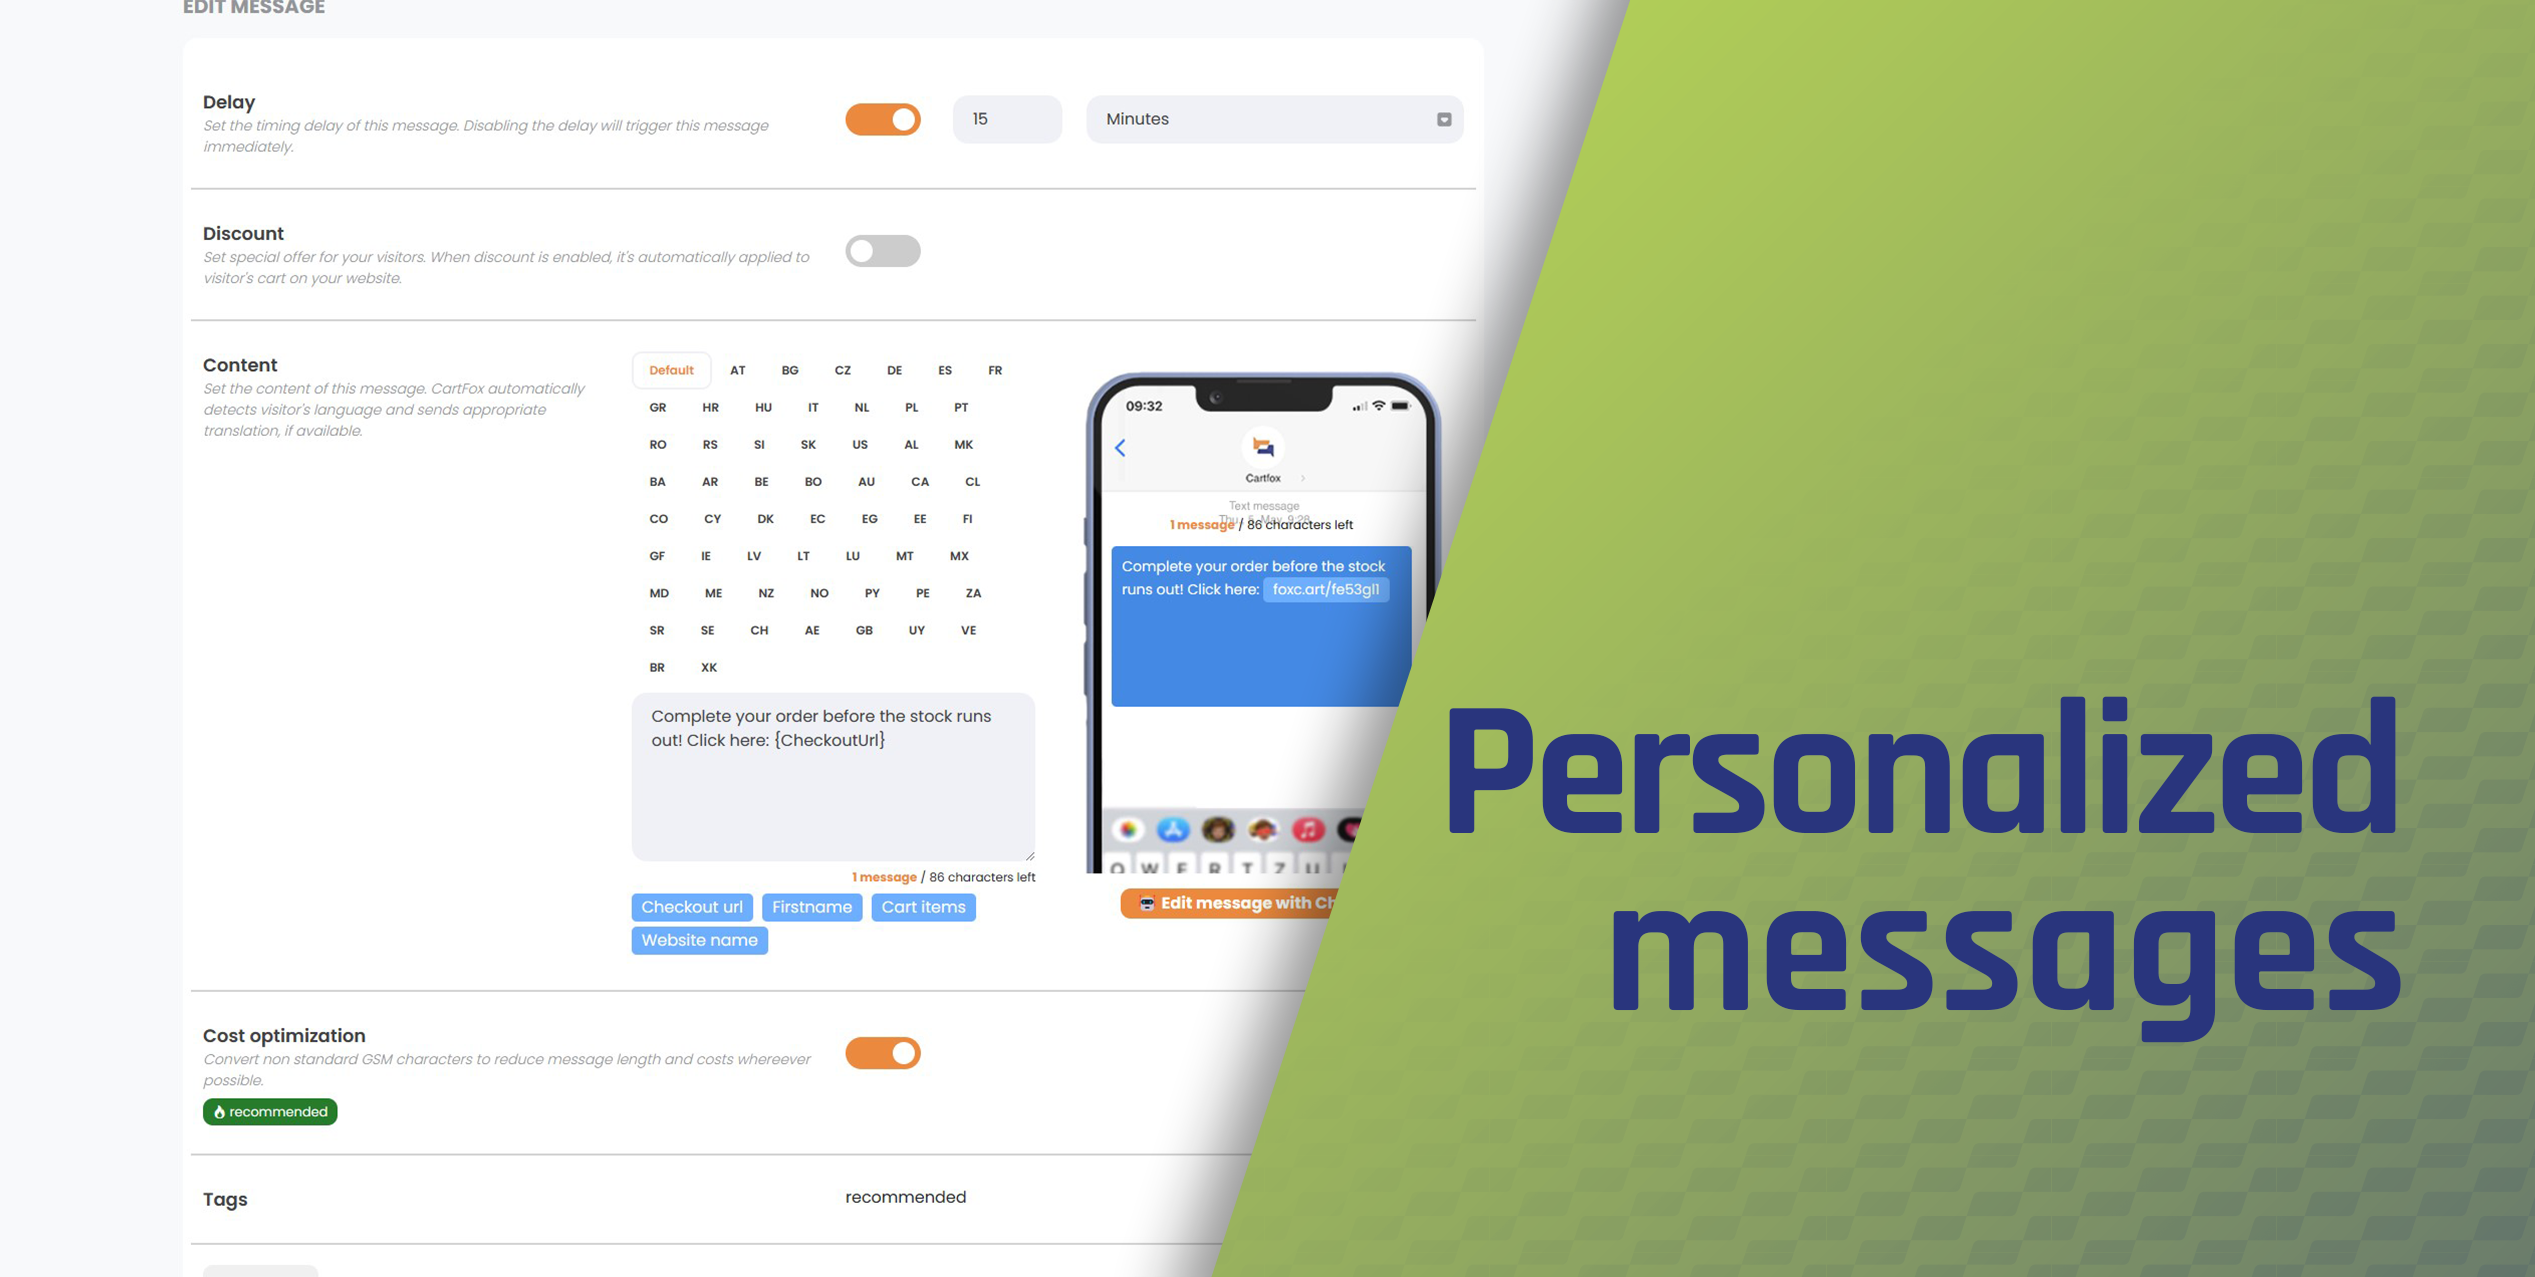 CartFox create personalized messages